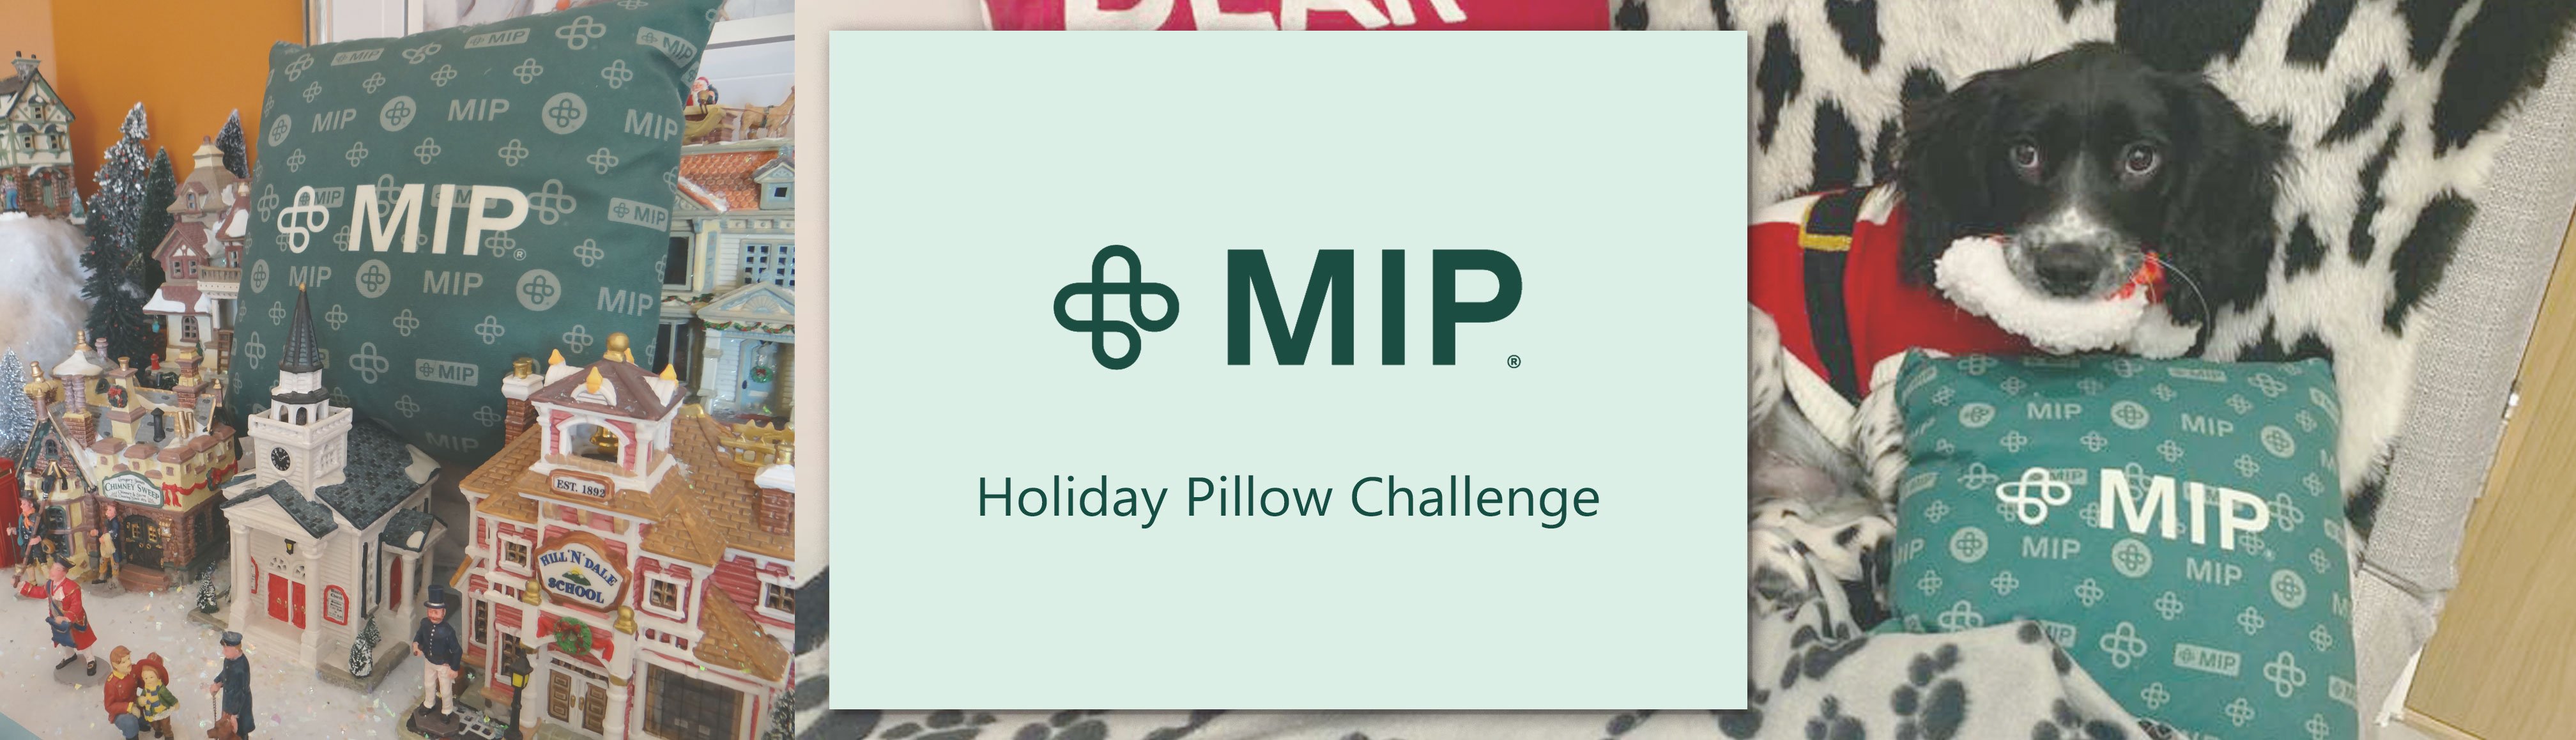 holiday pillow challenge